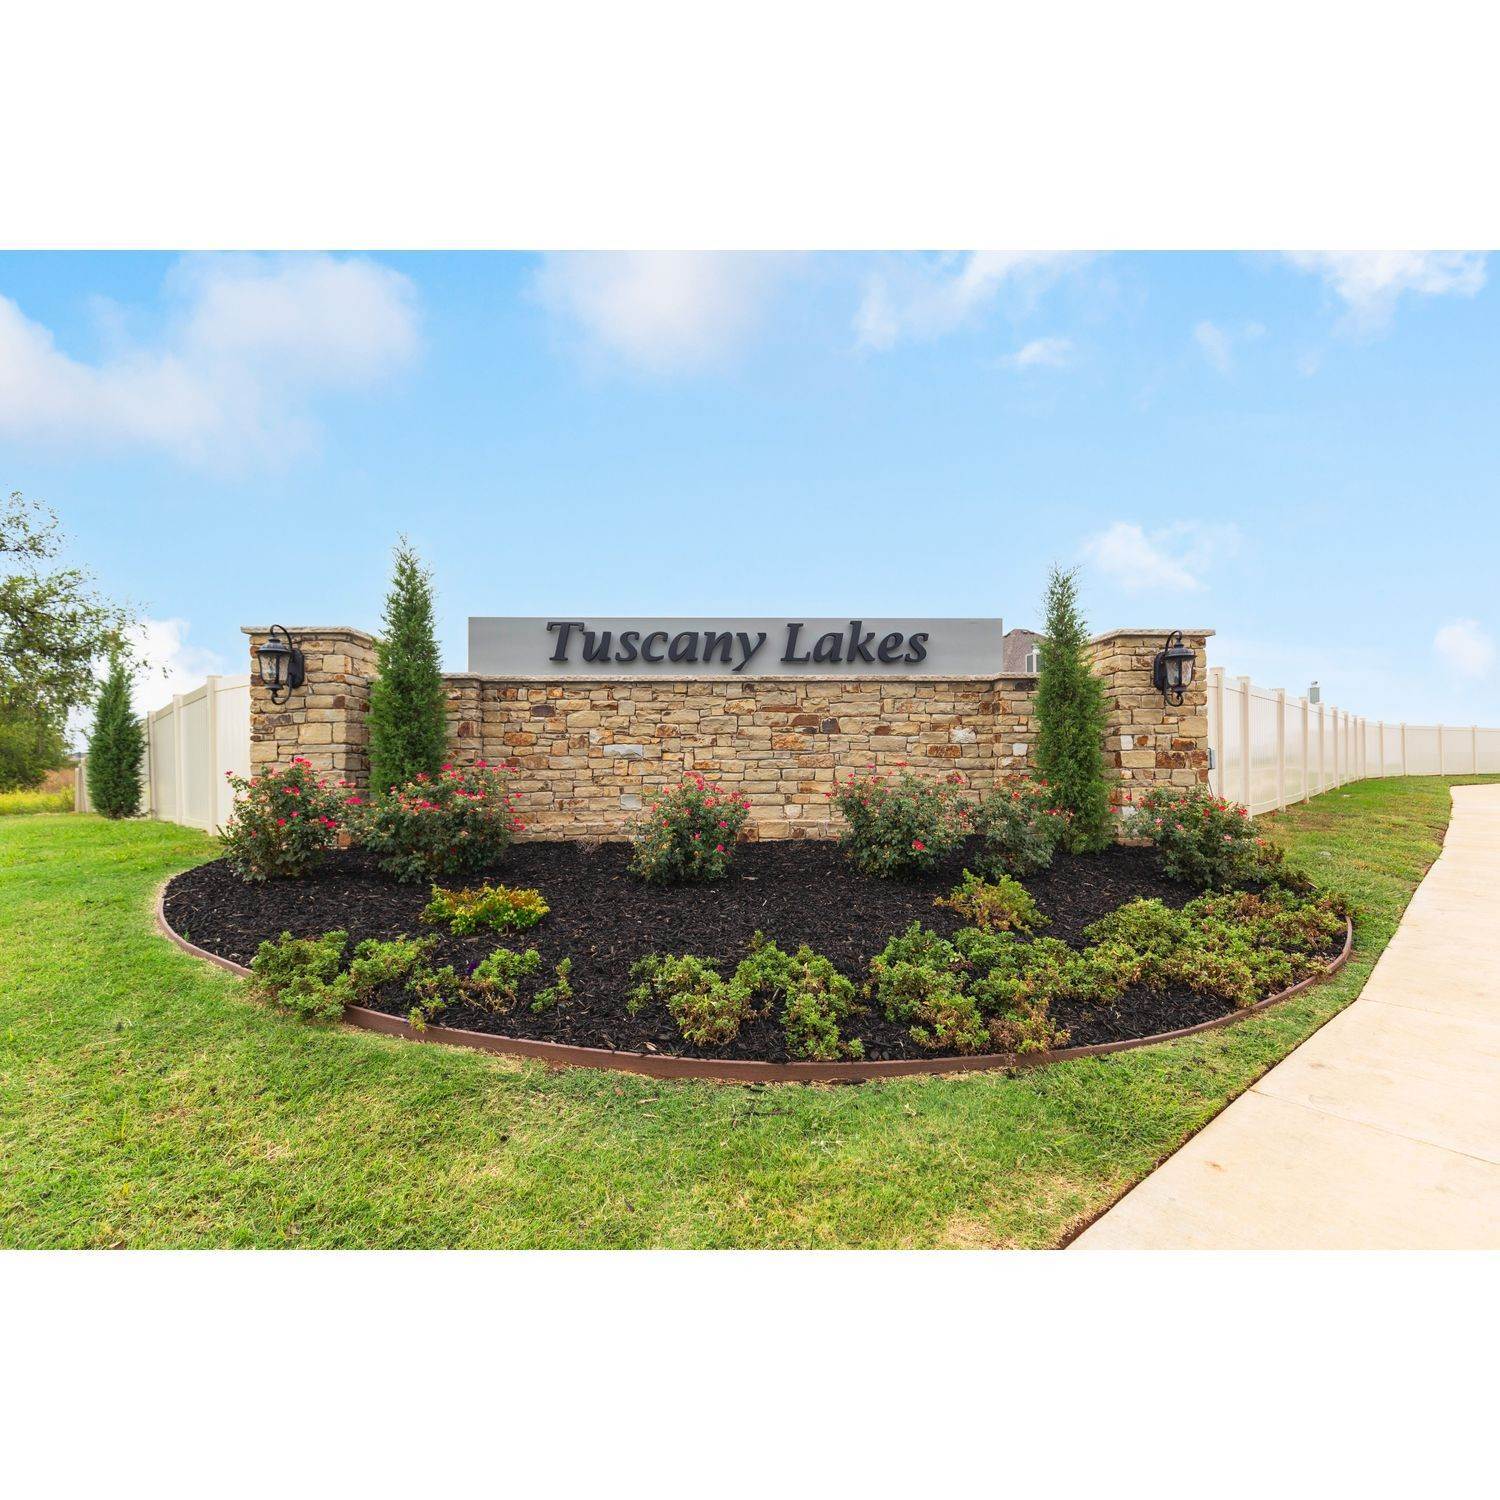 19. Tuscany Lakes building at N County Line Rd And NW 122nd St, Yukon, OK 73099